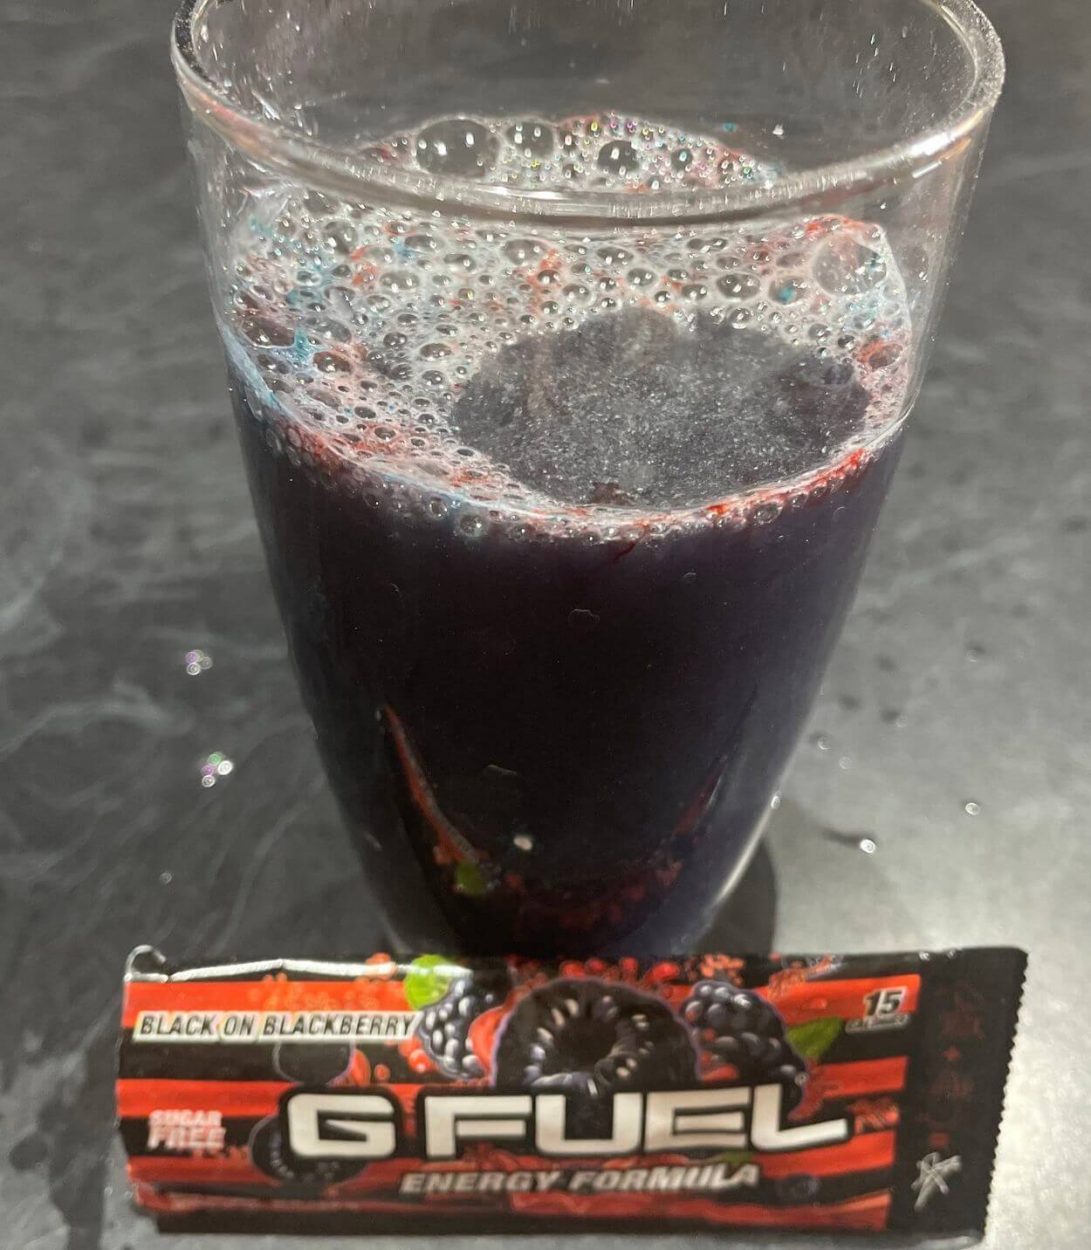 Black on Blackberry G Fuel flavor in a glass